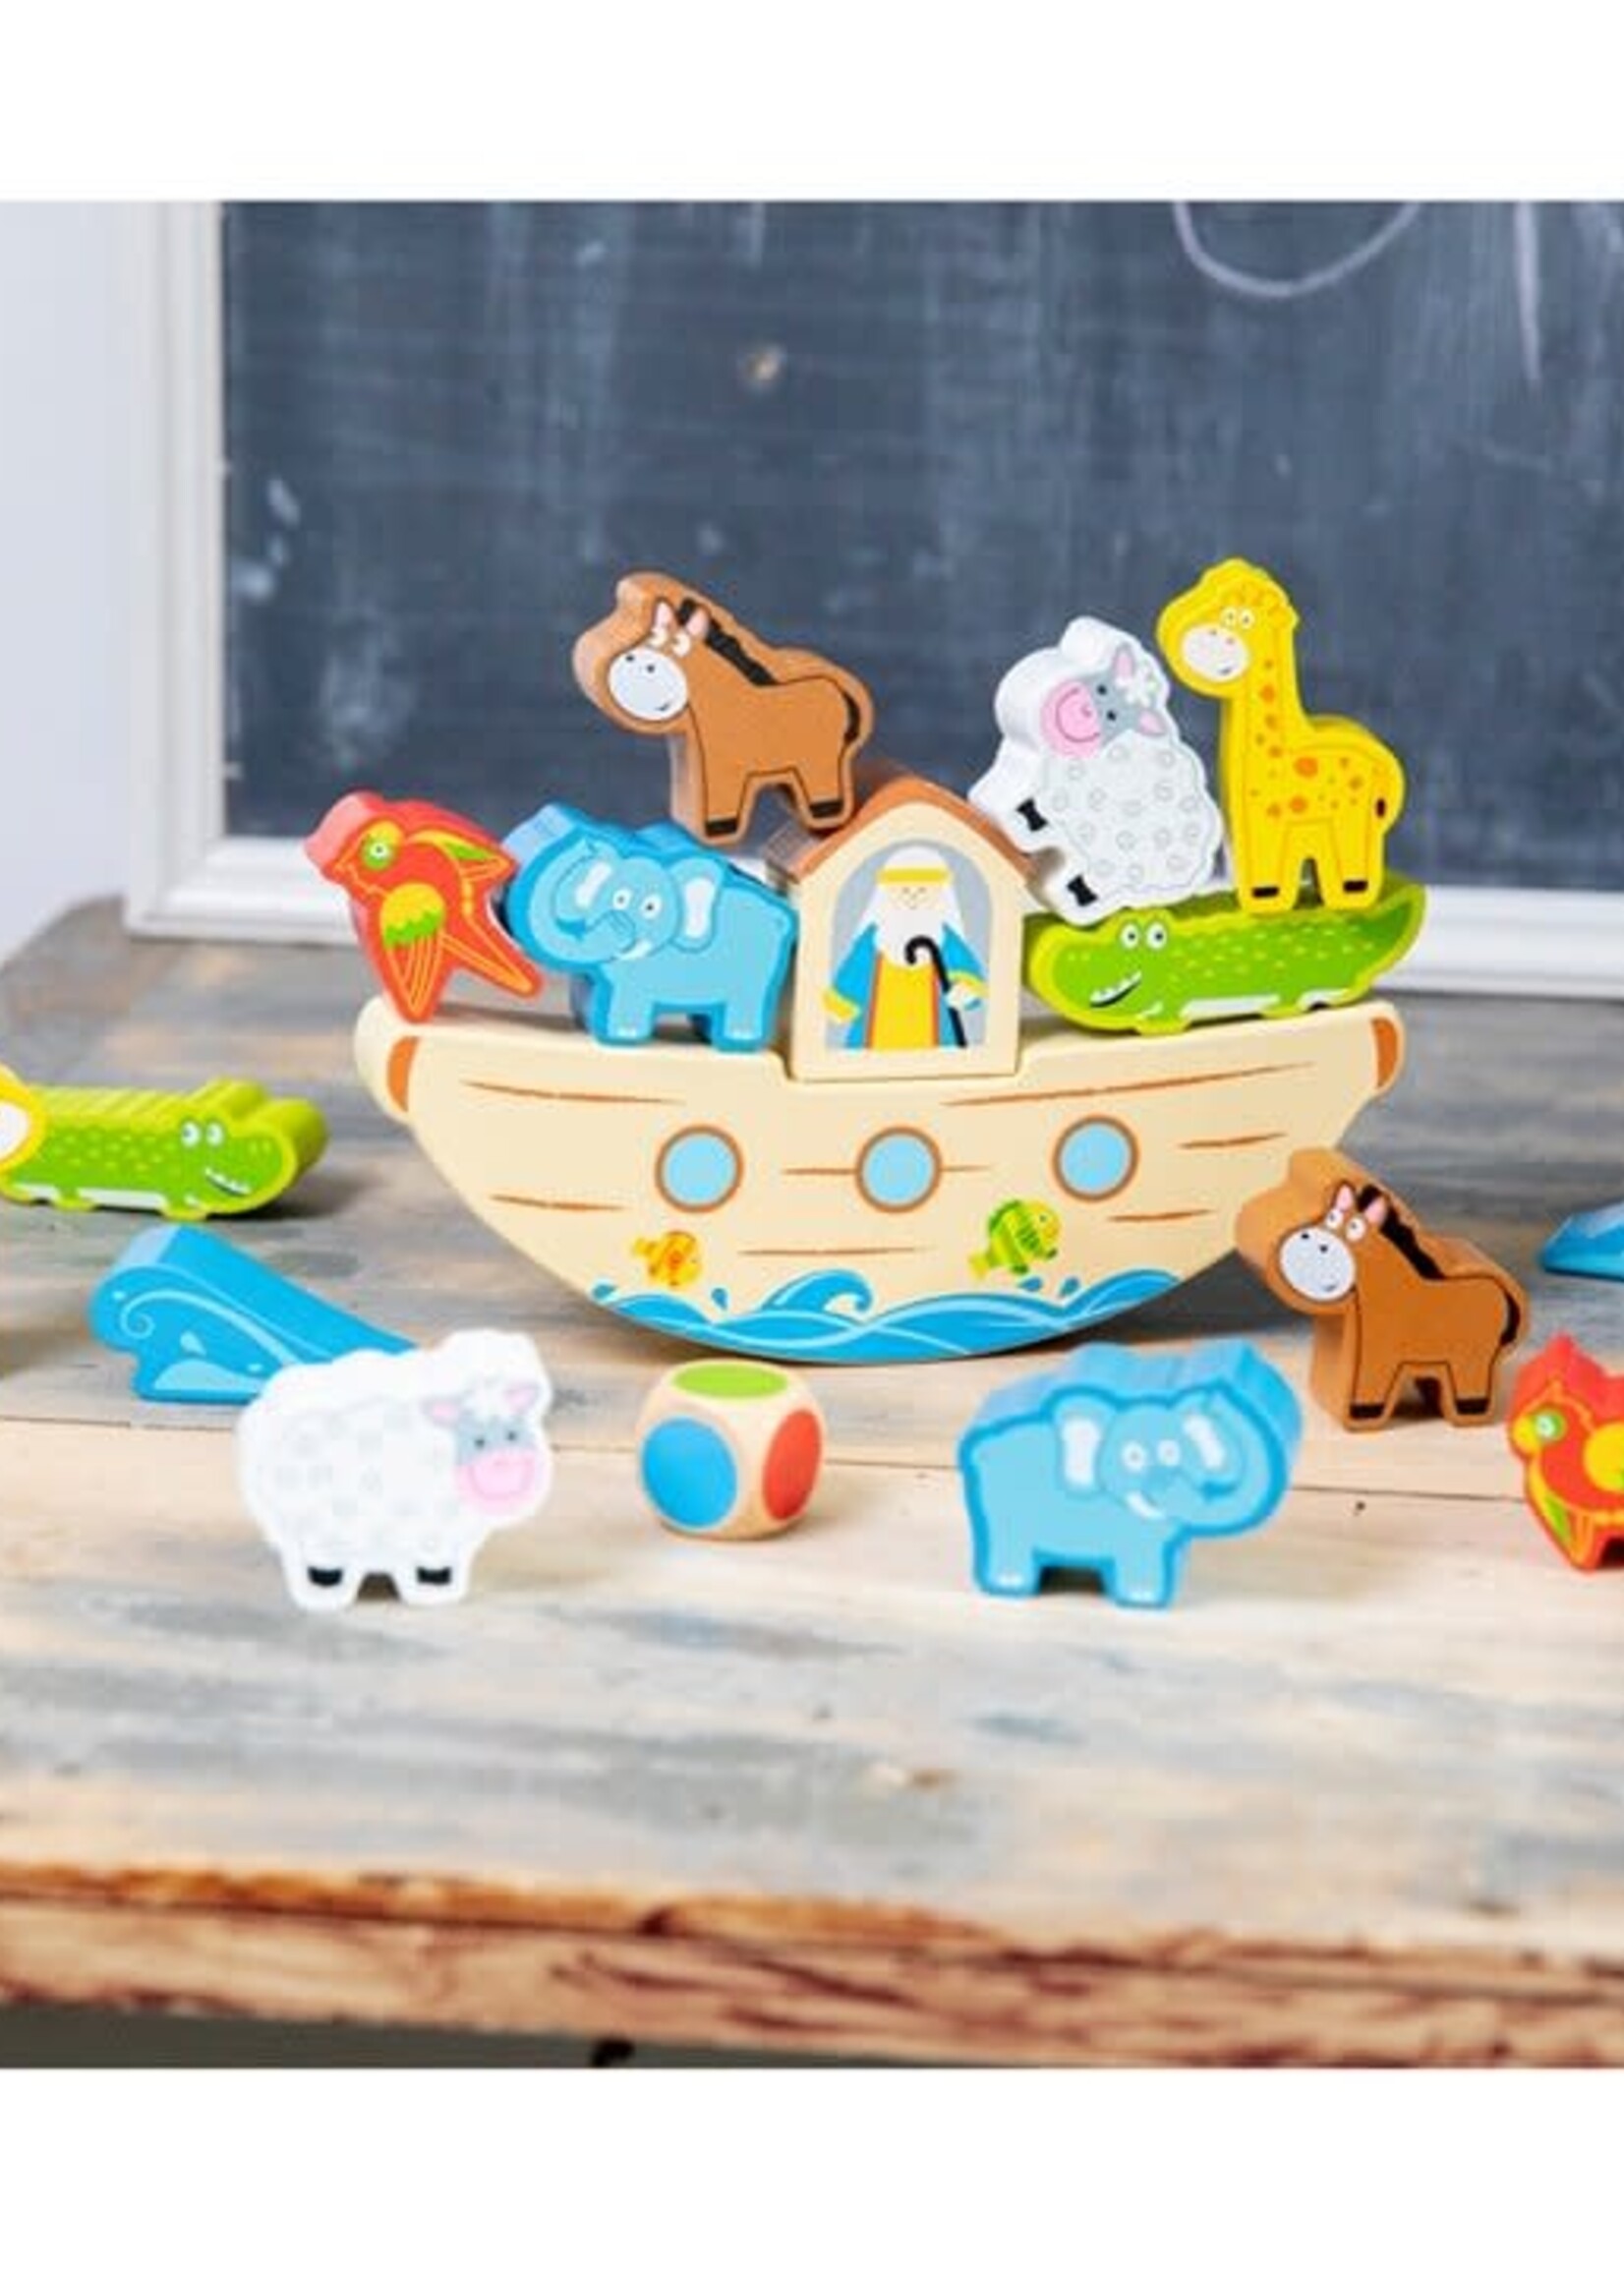 New Classic Toys New Classic Toys Balance game noah's ark